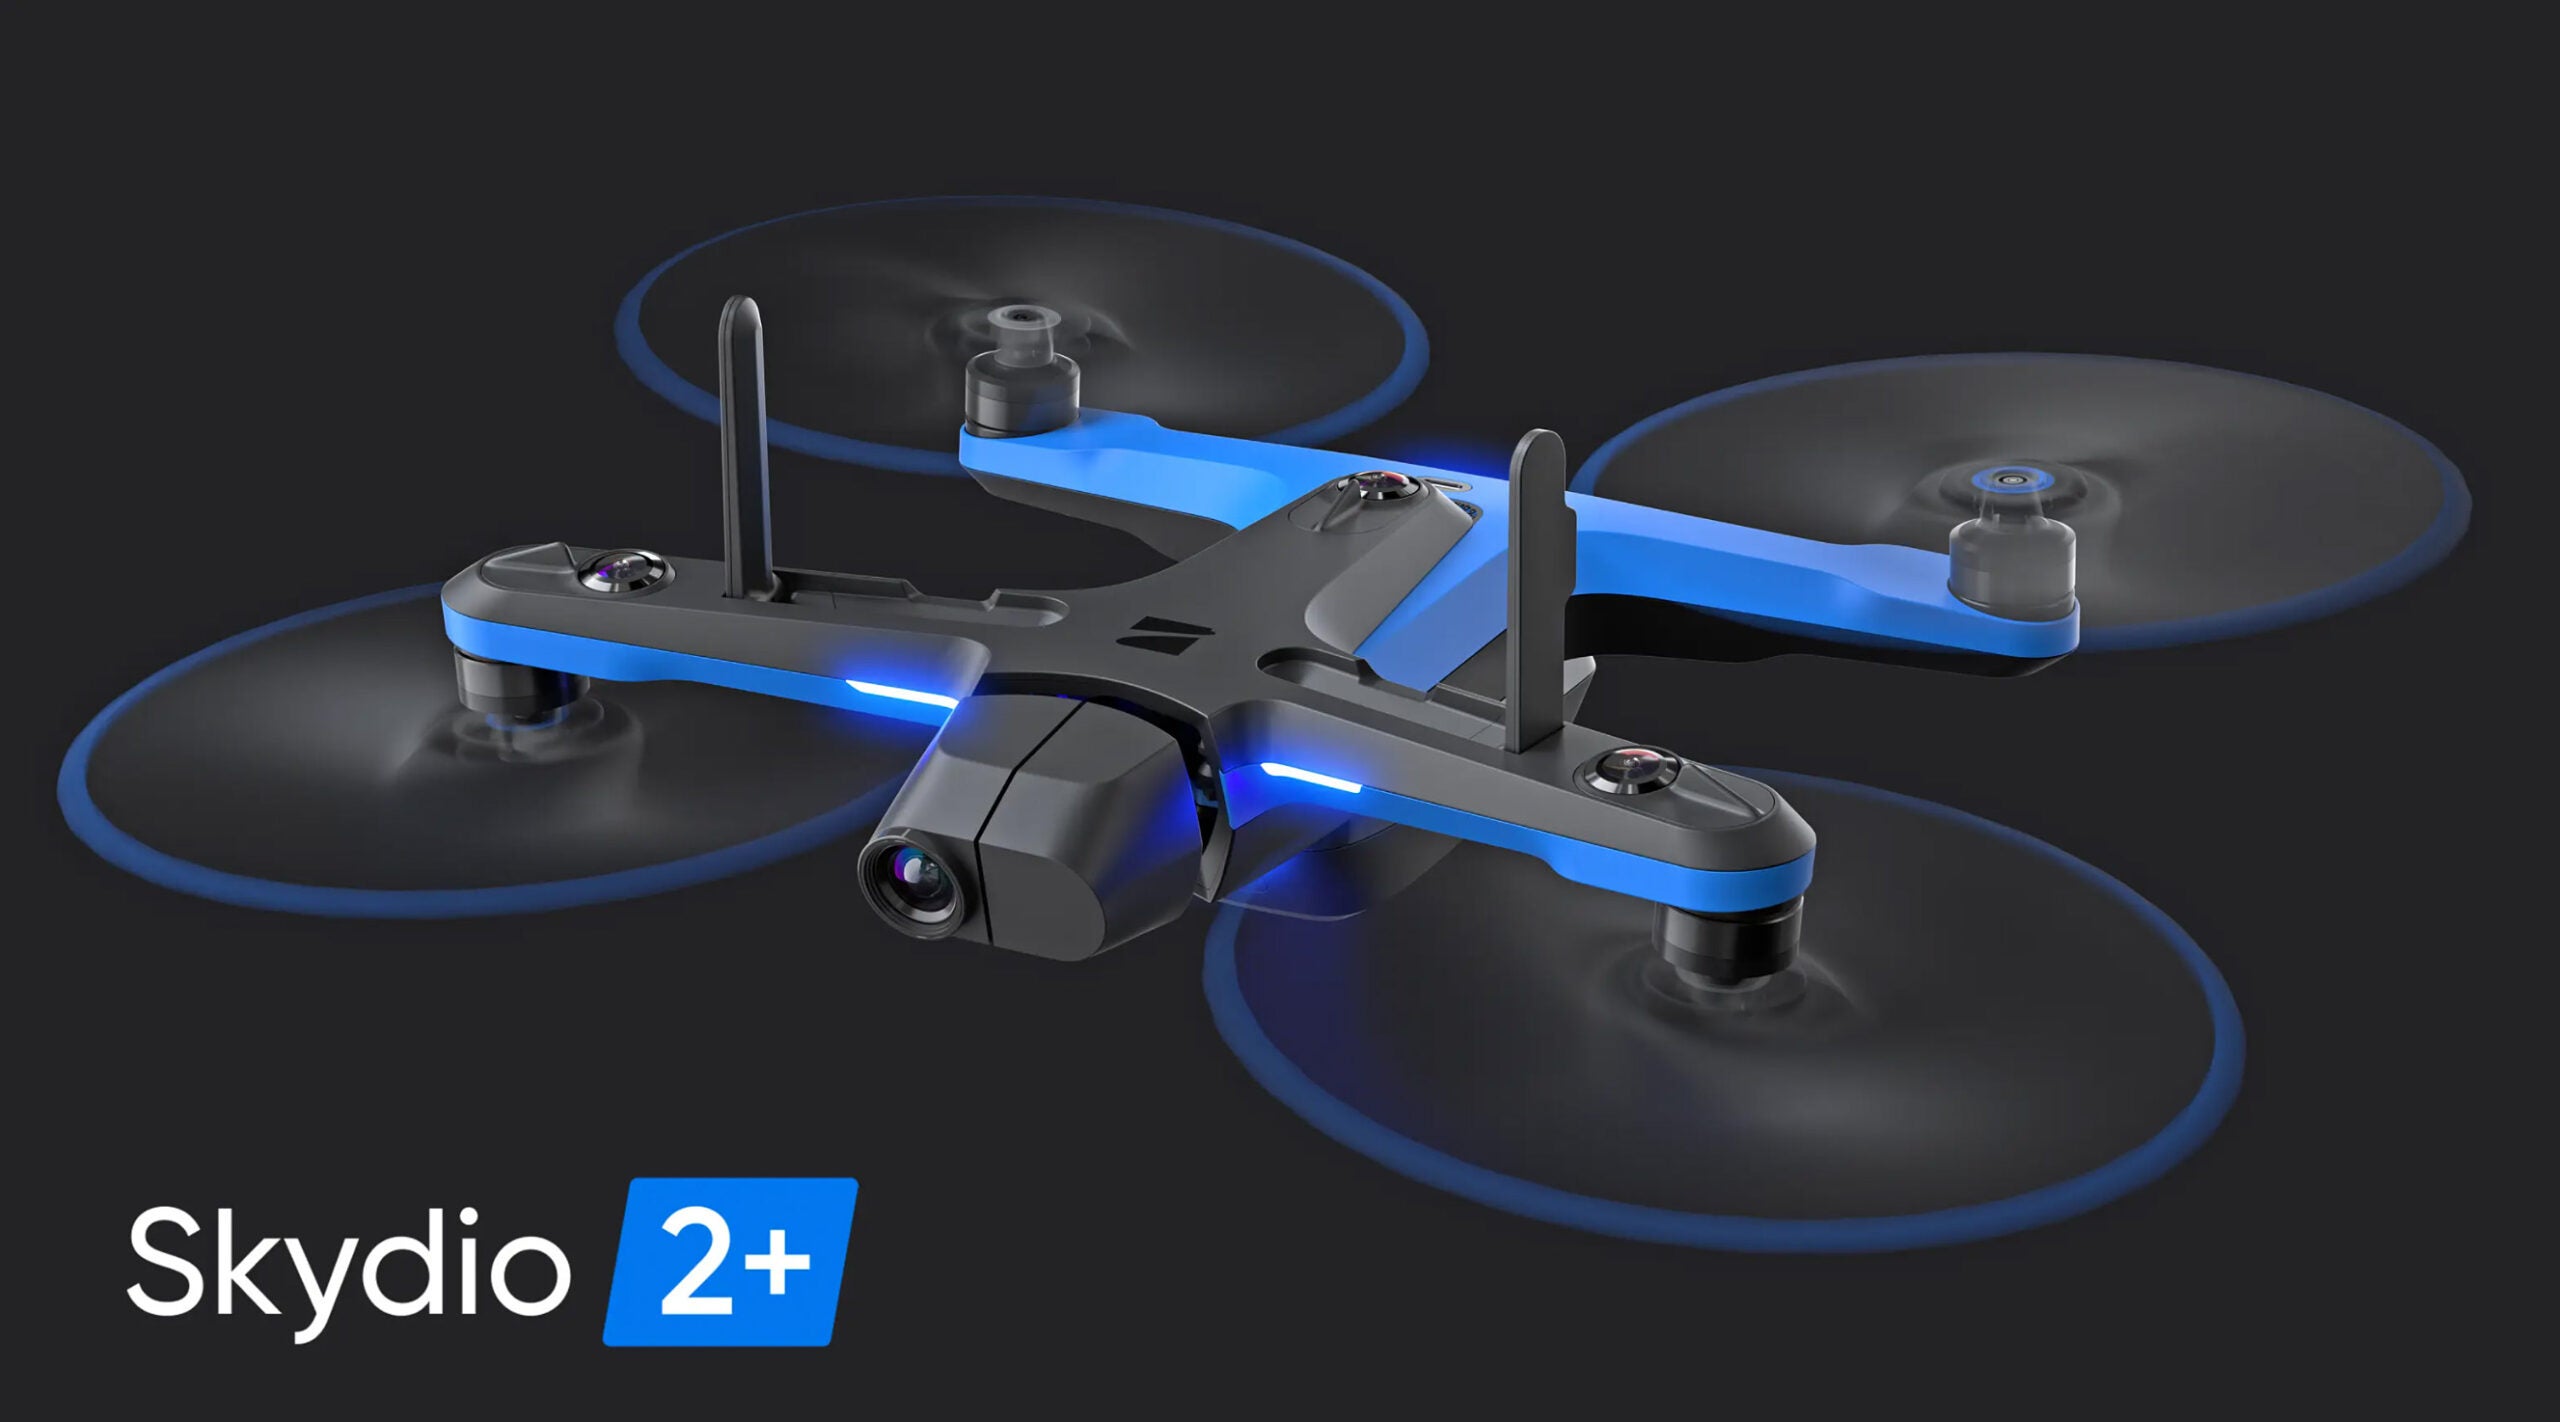 The new Skydio 2+ is available now.